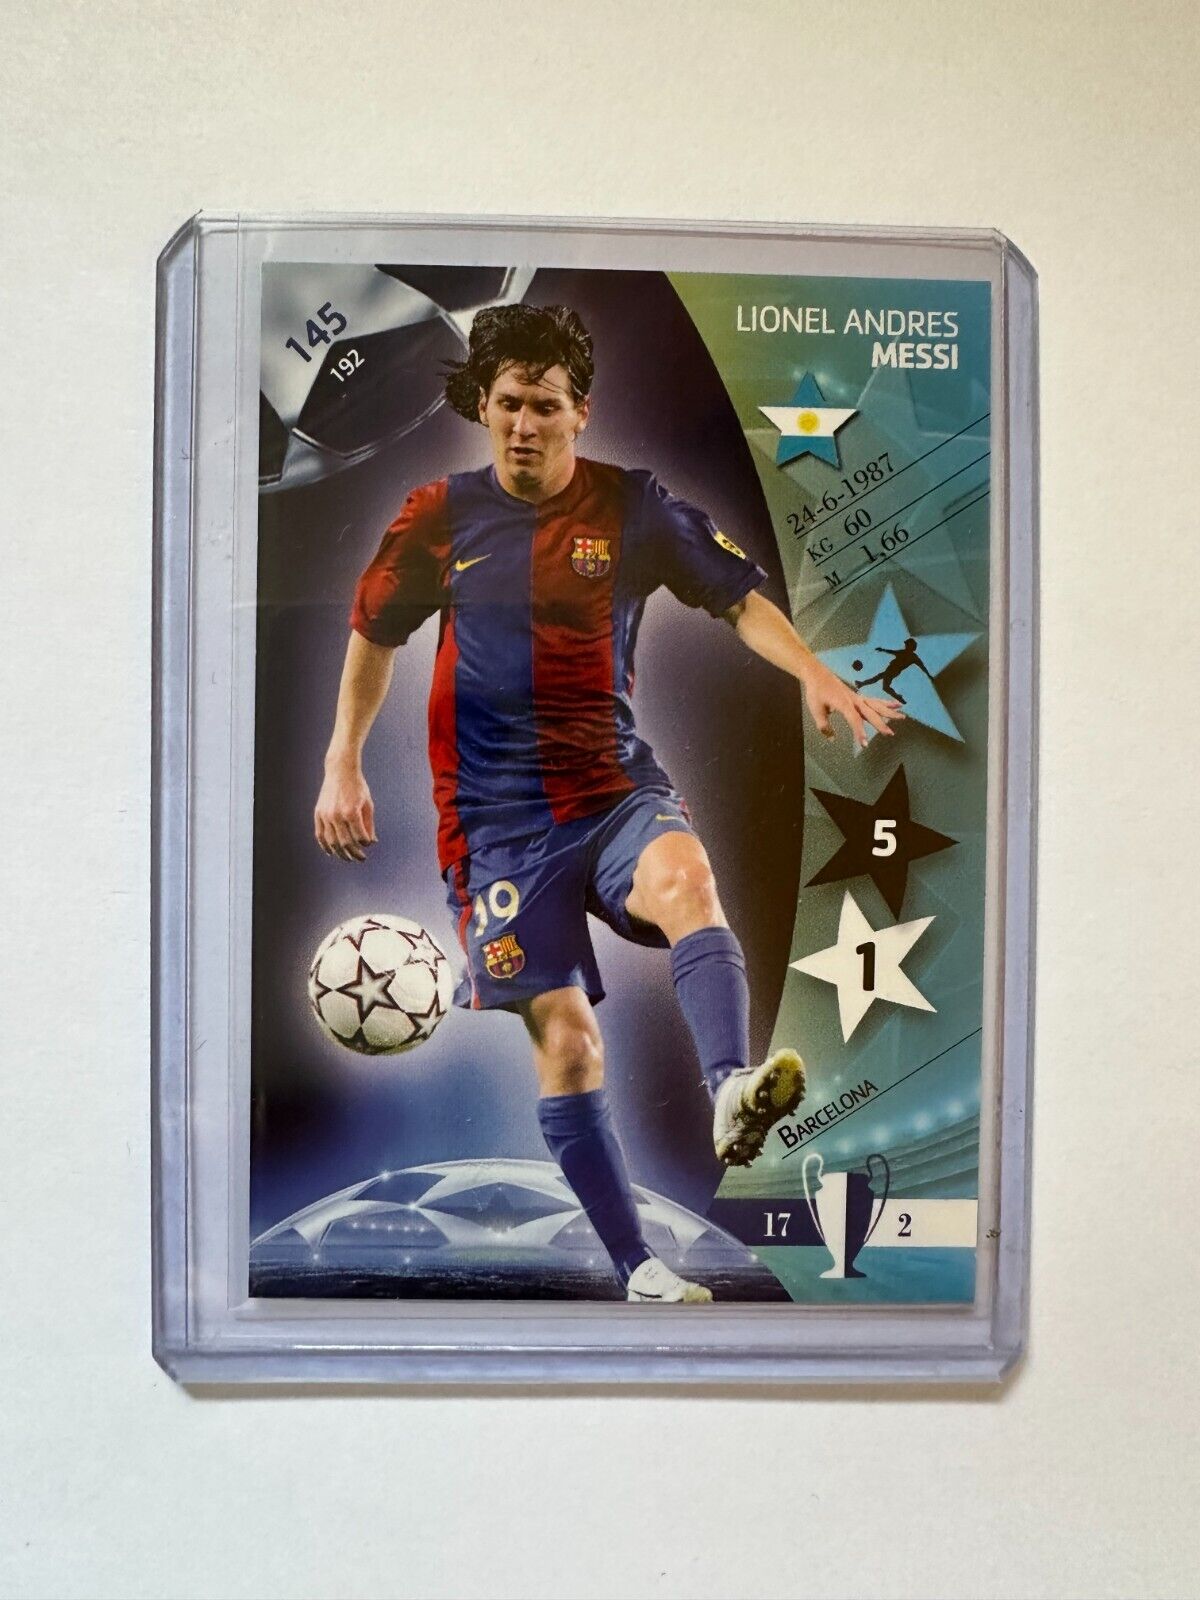 2007 UEFA Champions League Trading Cards Panini - 145 Lionel Messi CL 07